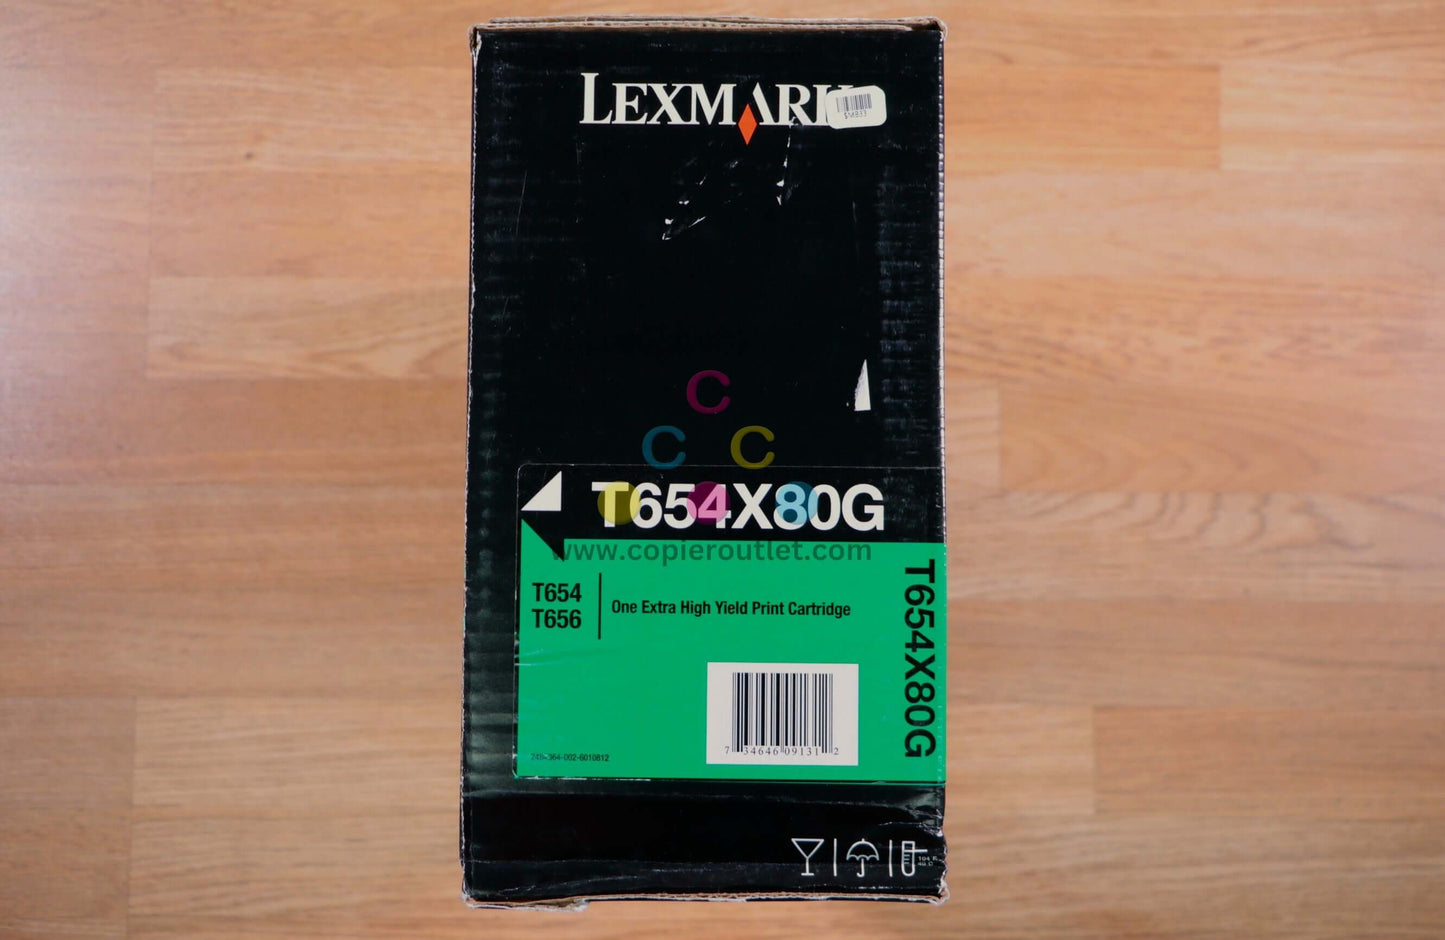 Genuine Lexmark T654X80G Black Extra High Yield Print Cart. T654/T656 Same Day!! - copier-clearance-center